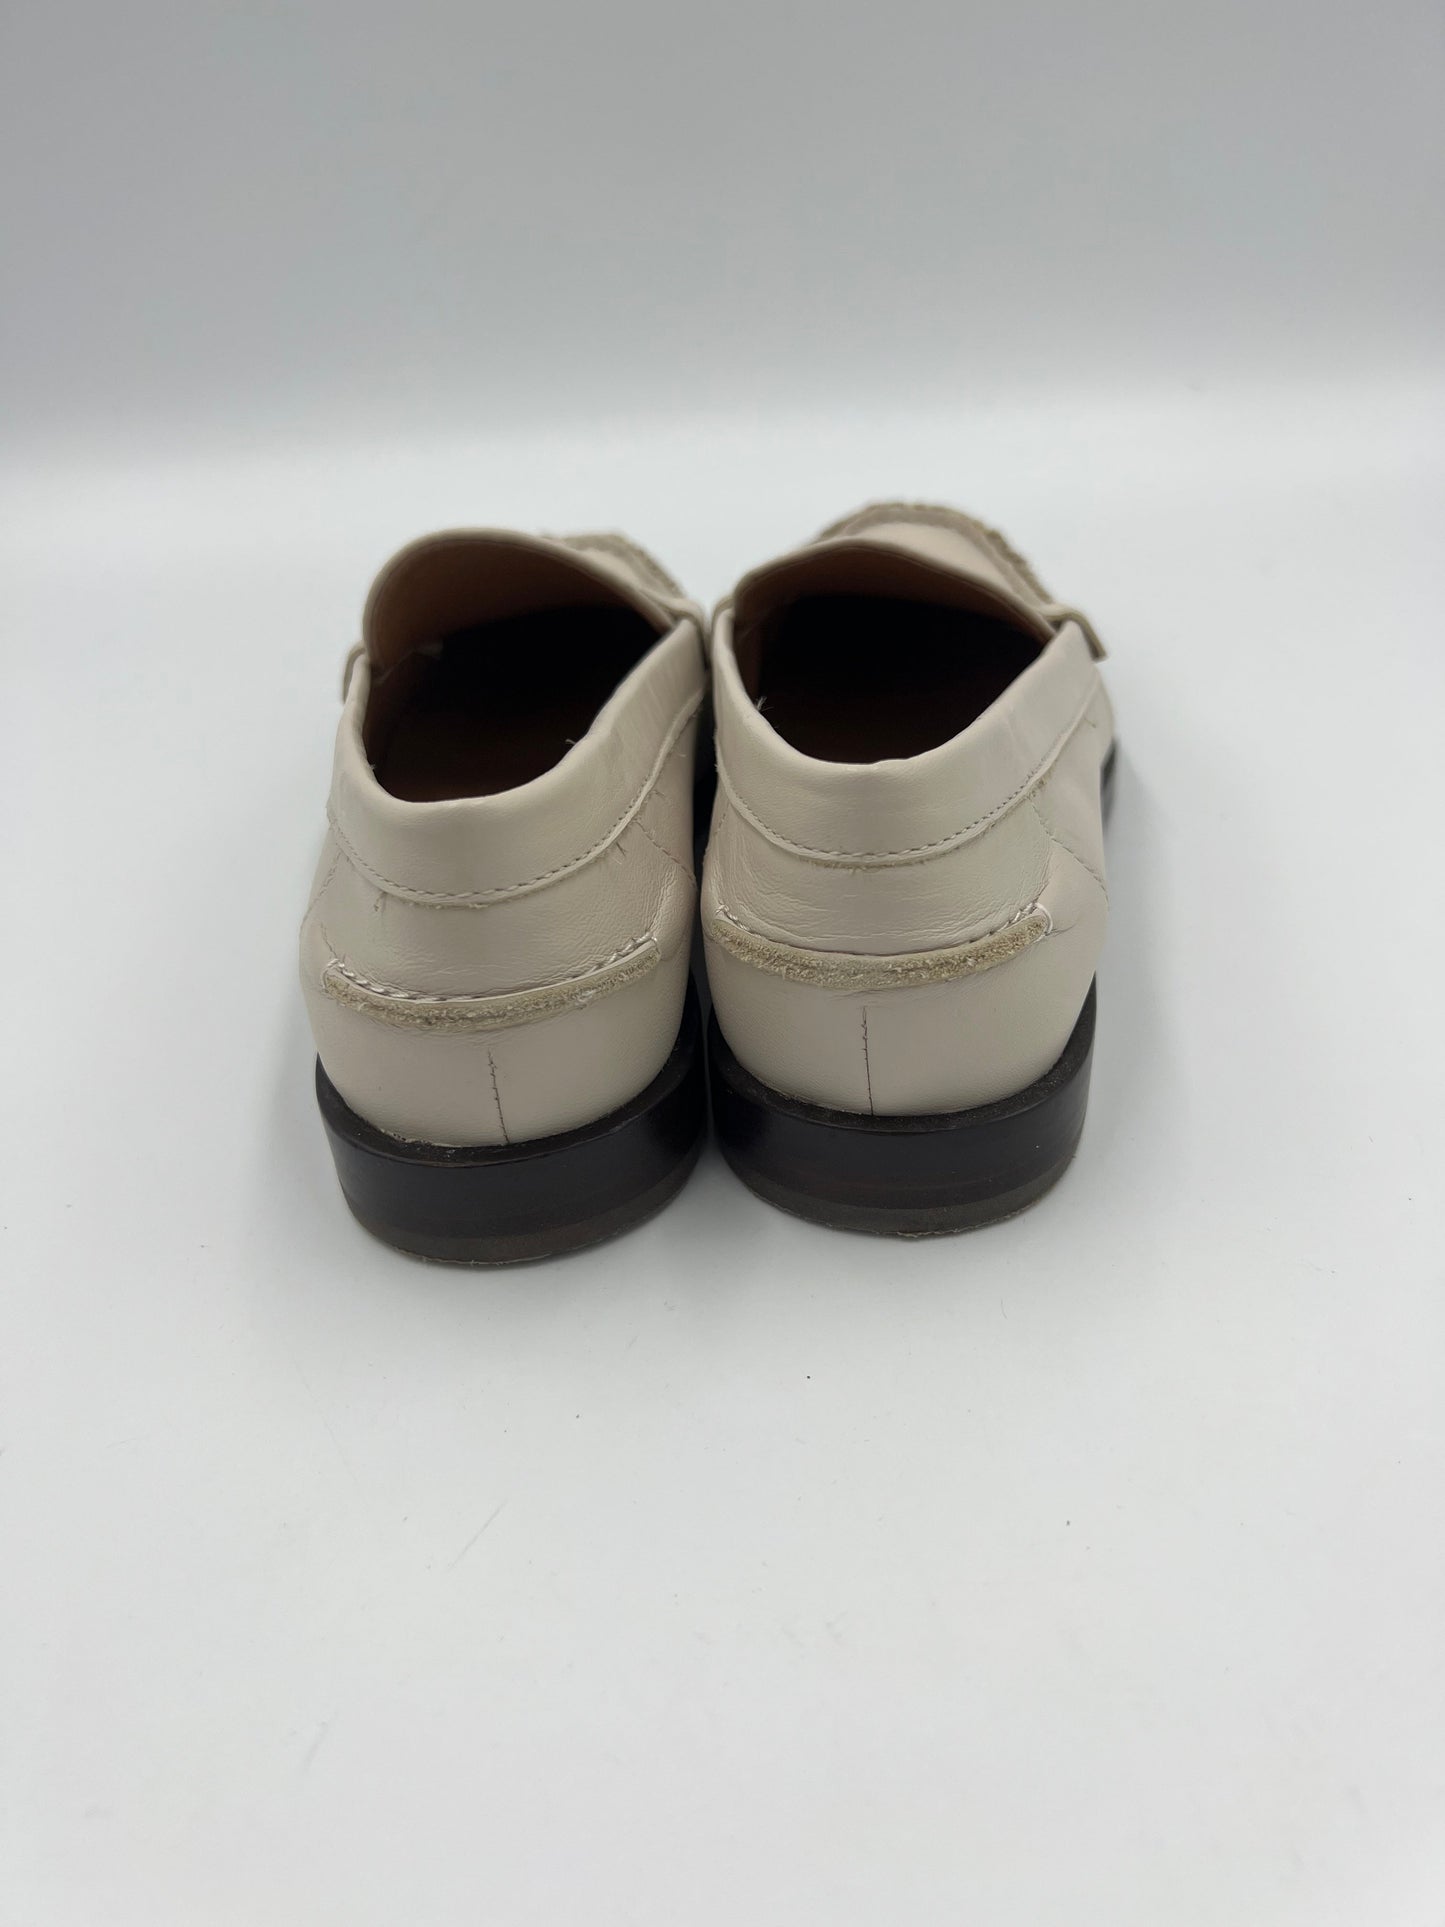 White Shoes Flats Loafer Oxford Madewell, Size 6